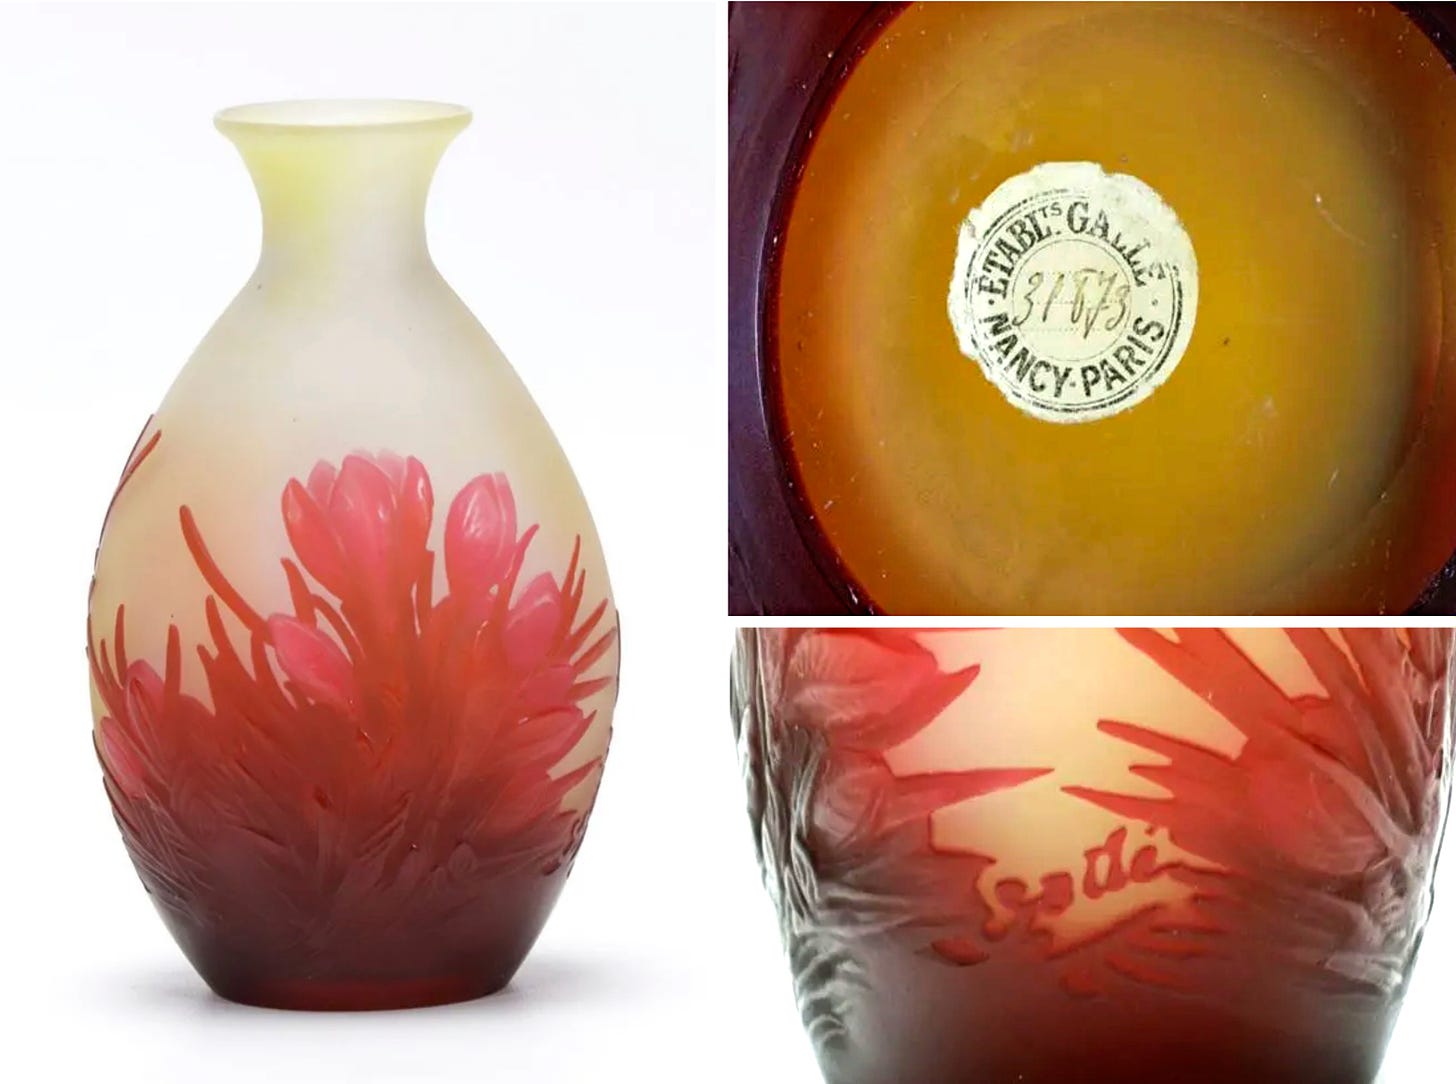 Crocus relief vase, Mk IV signed, ca. 1925-1936, with an E7 label numbered 31,873, Montpellier 2021-03-06 #169A.